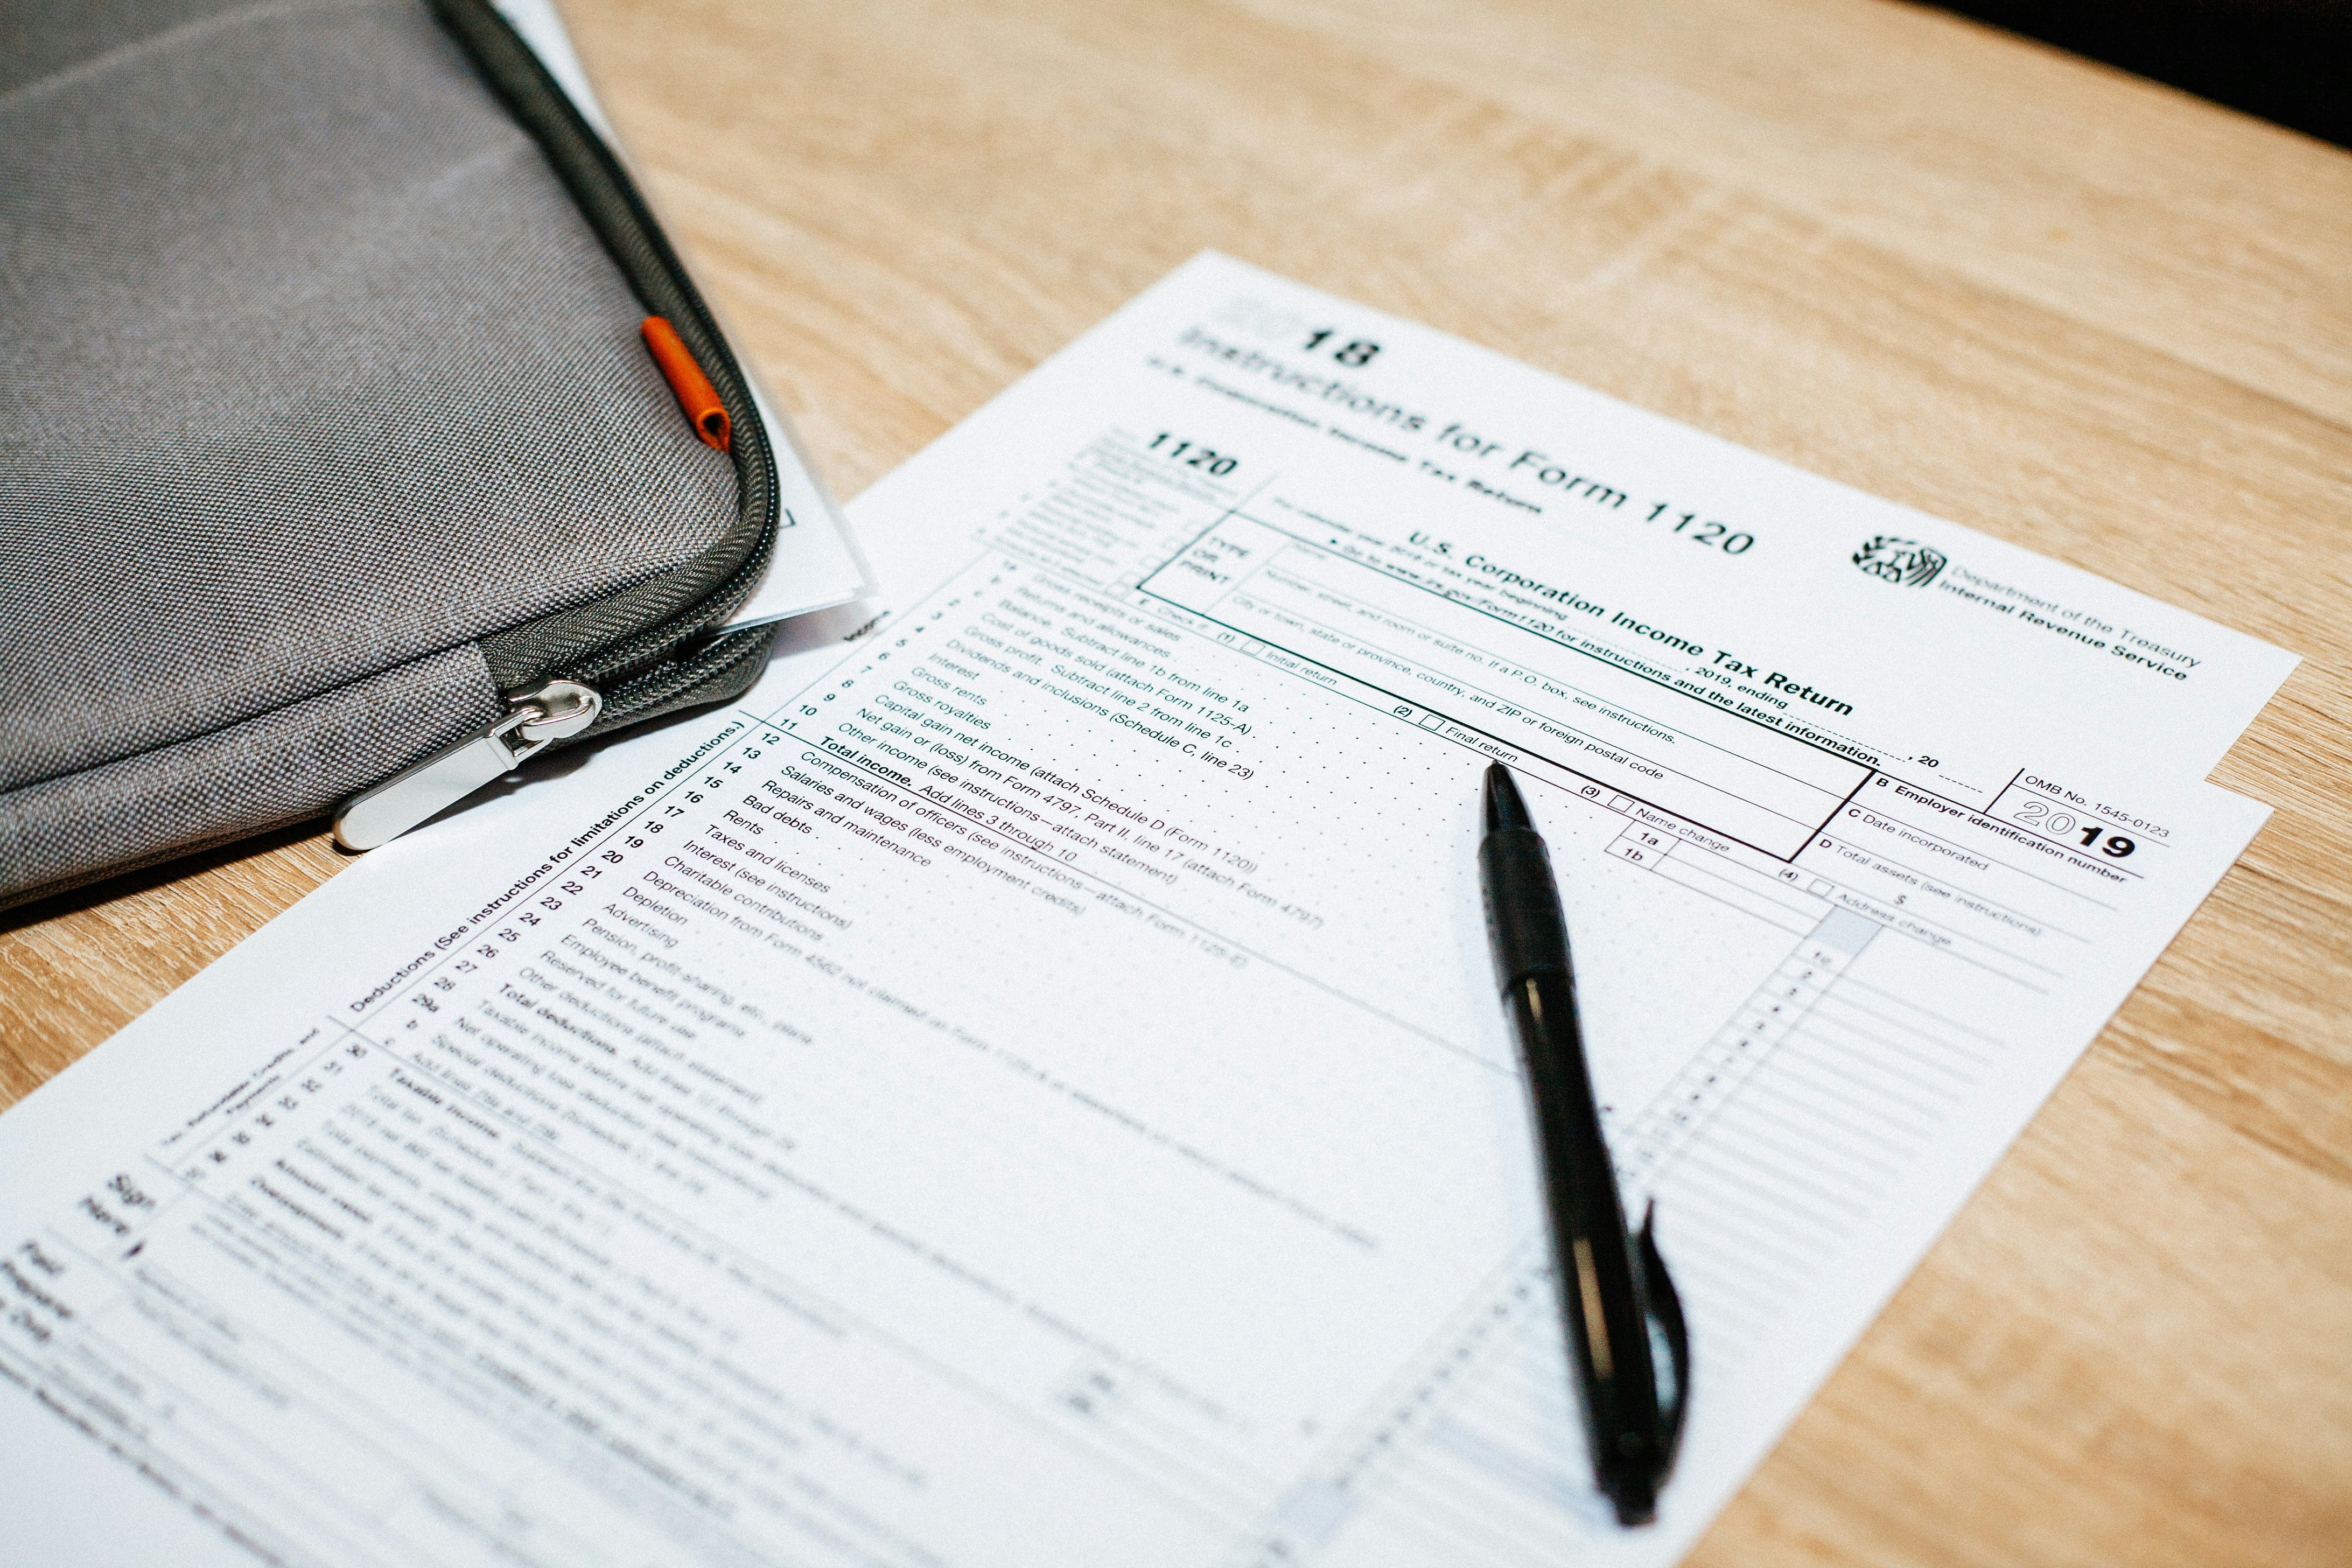 What forms does a new employee need to fill out